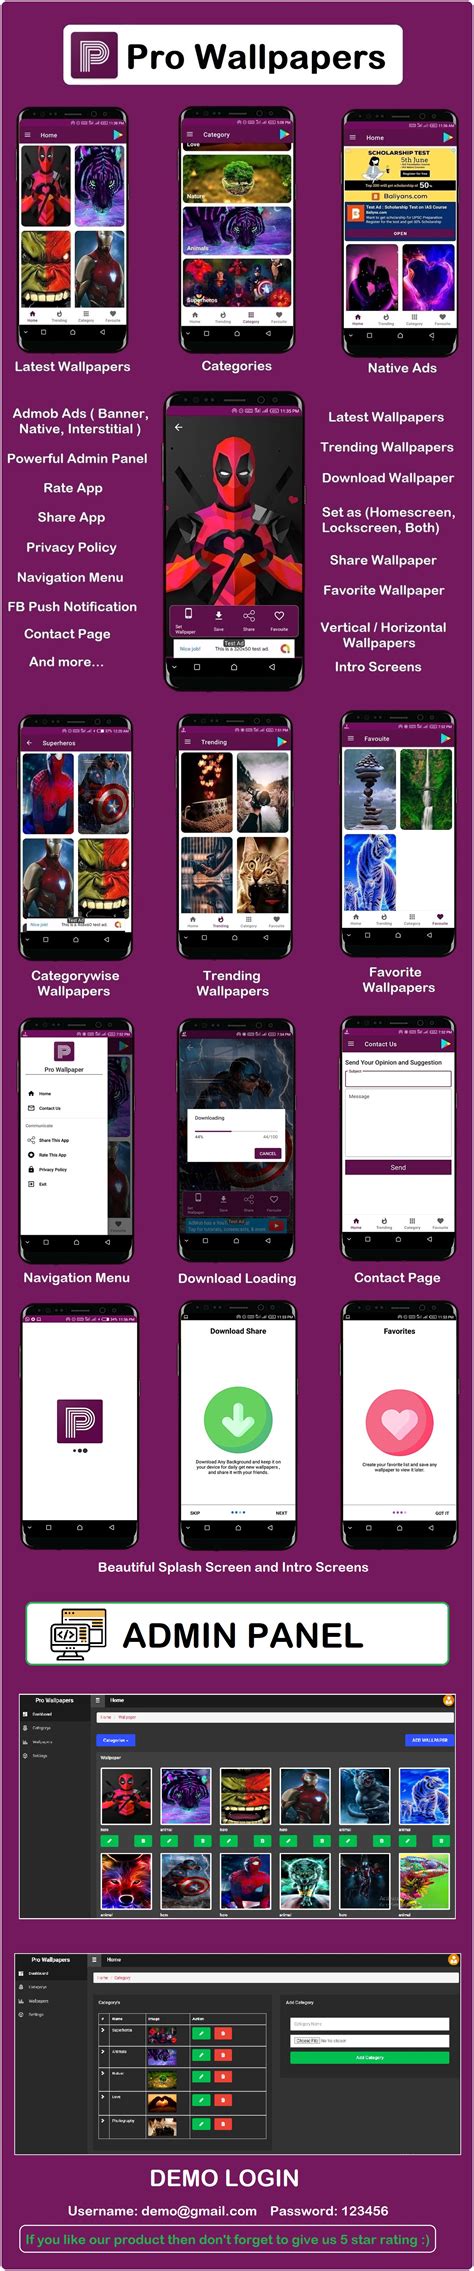 Nulled Pro Wallpapers Android App with Admin Panel free download - Themes Download